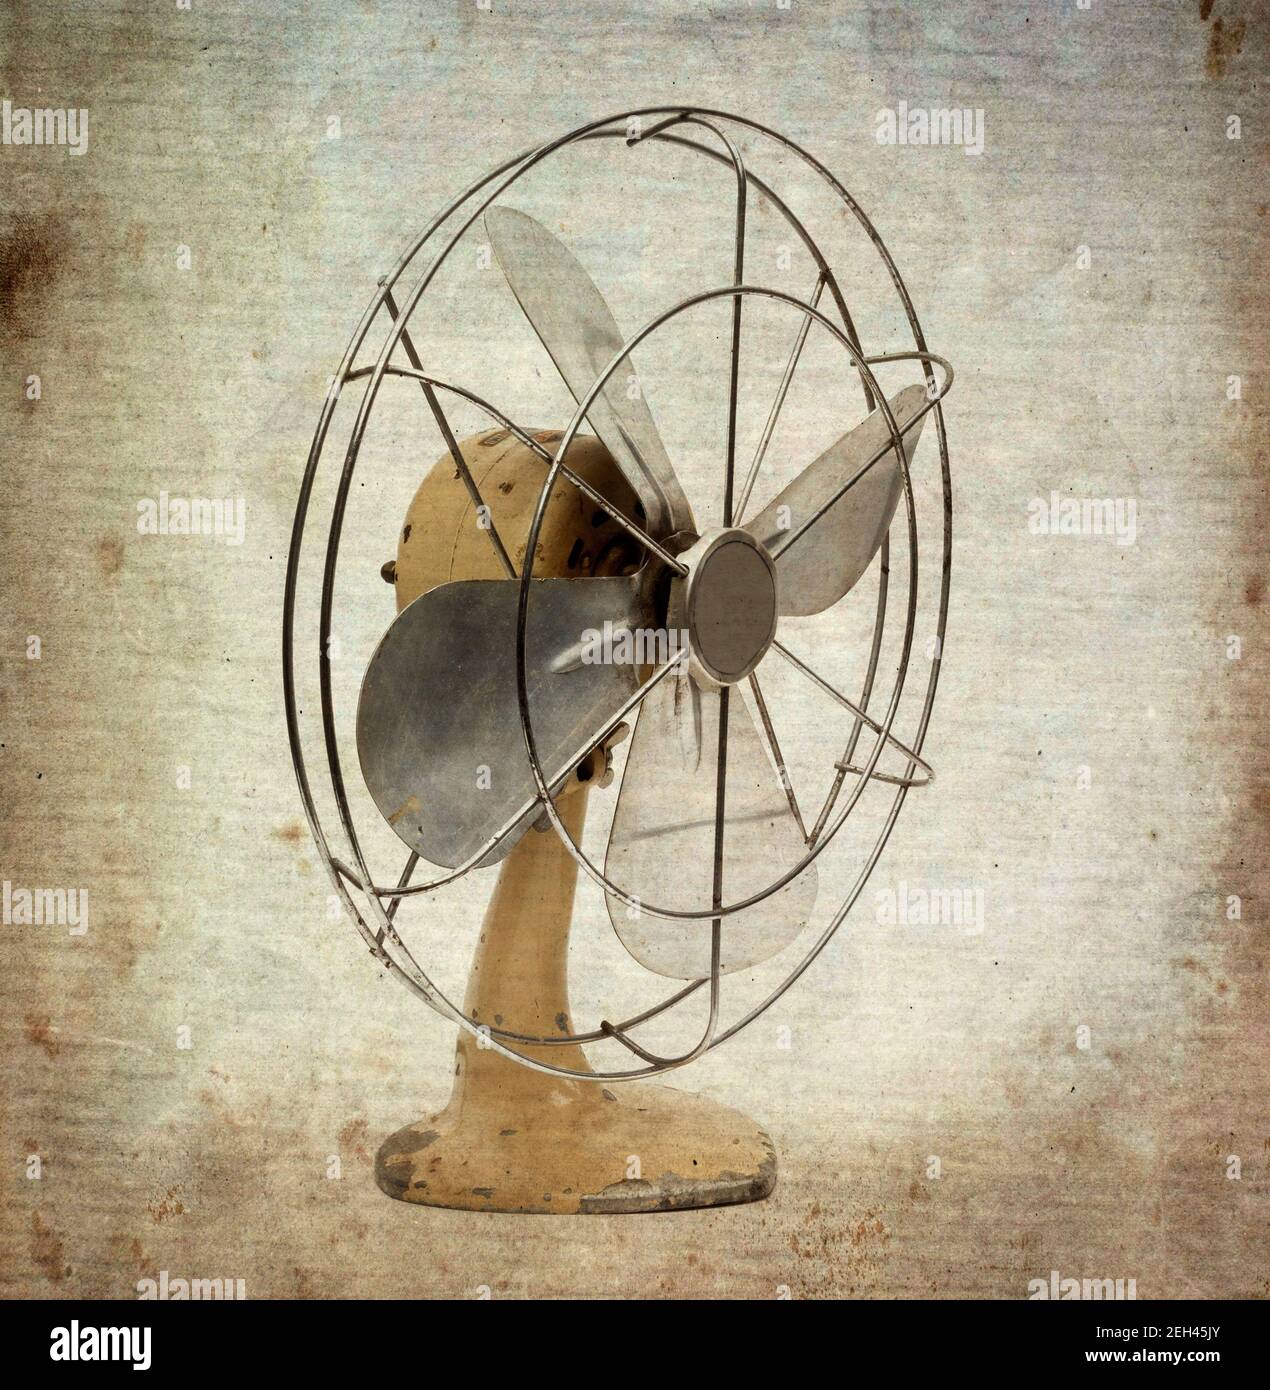 Closeup shot of a vintage retro fan with a grunge effect Stock Photo